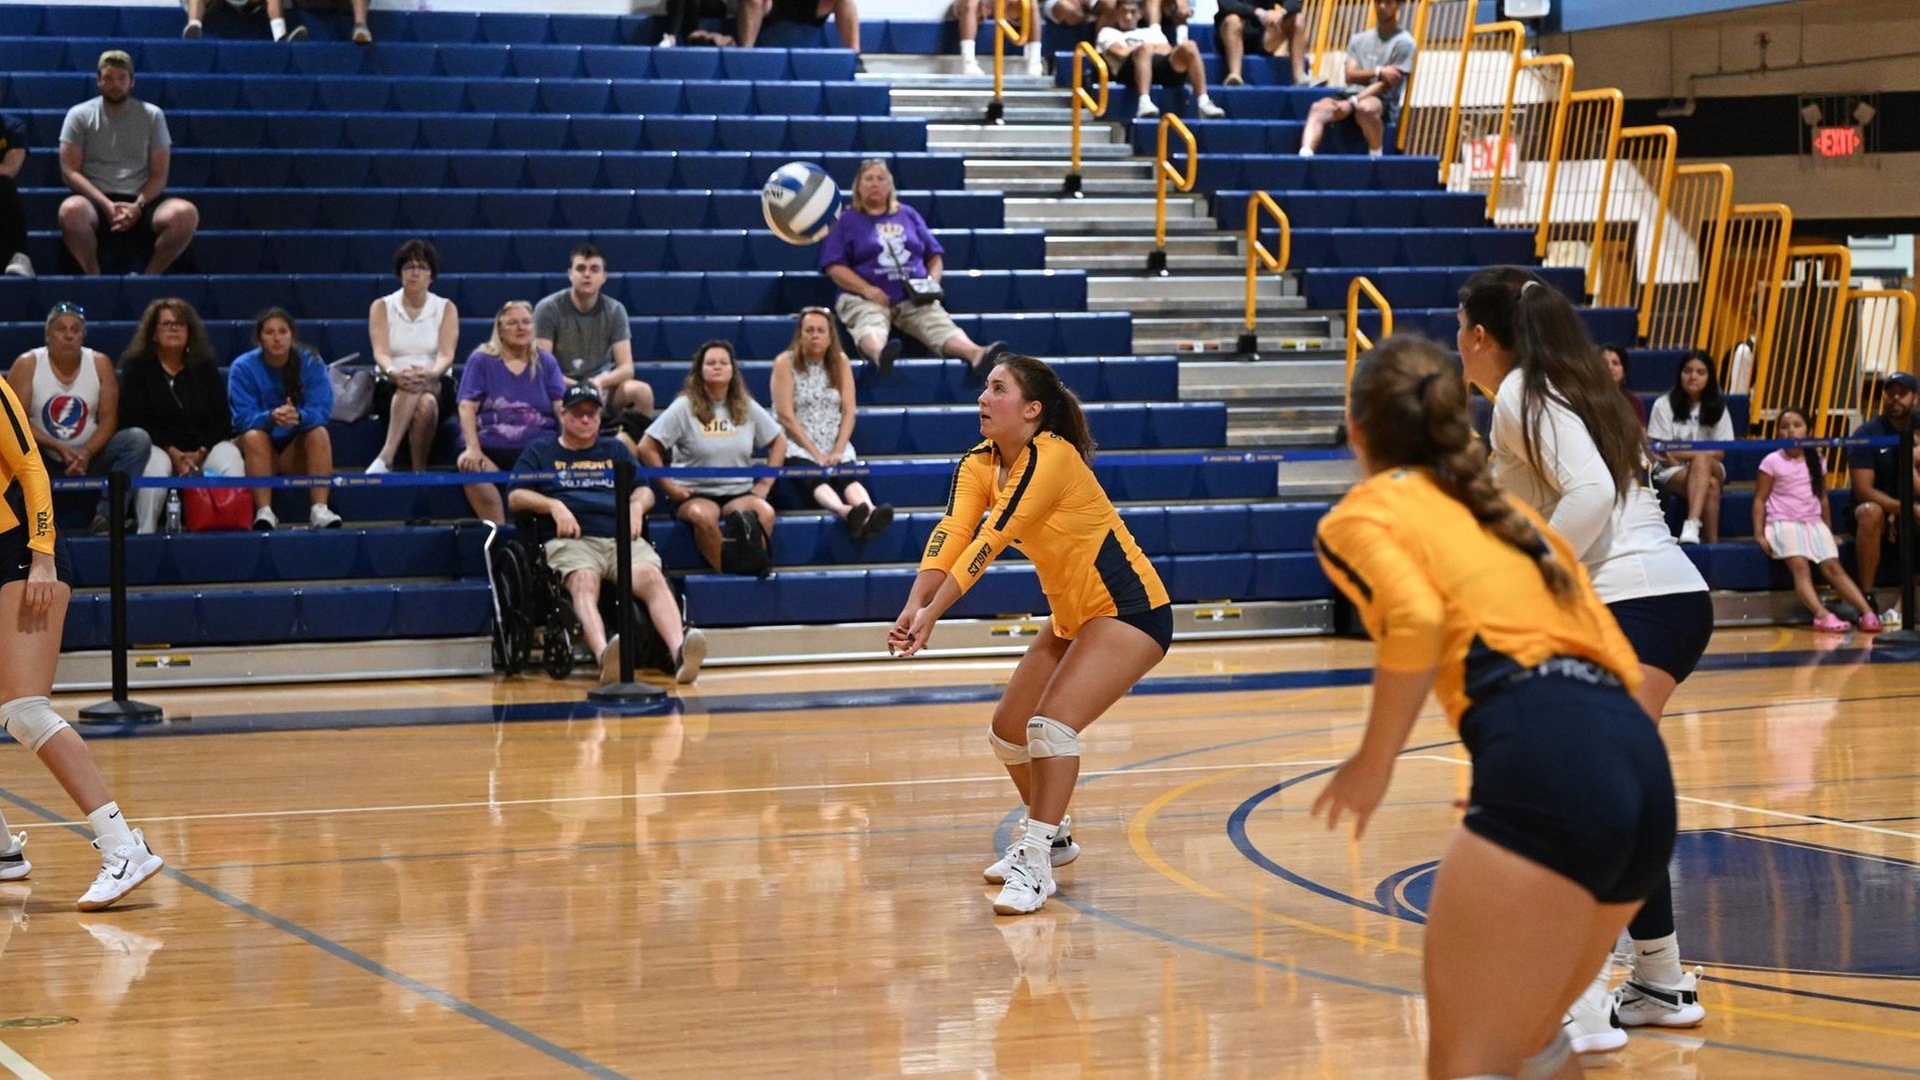 Women's Volleyball Falls to Ramapo and Wilkes